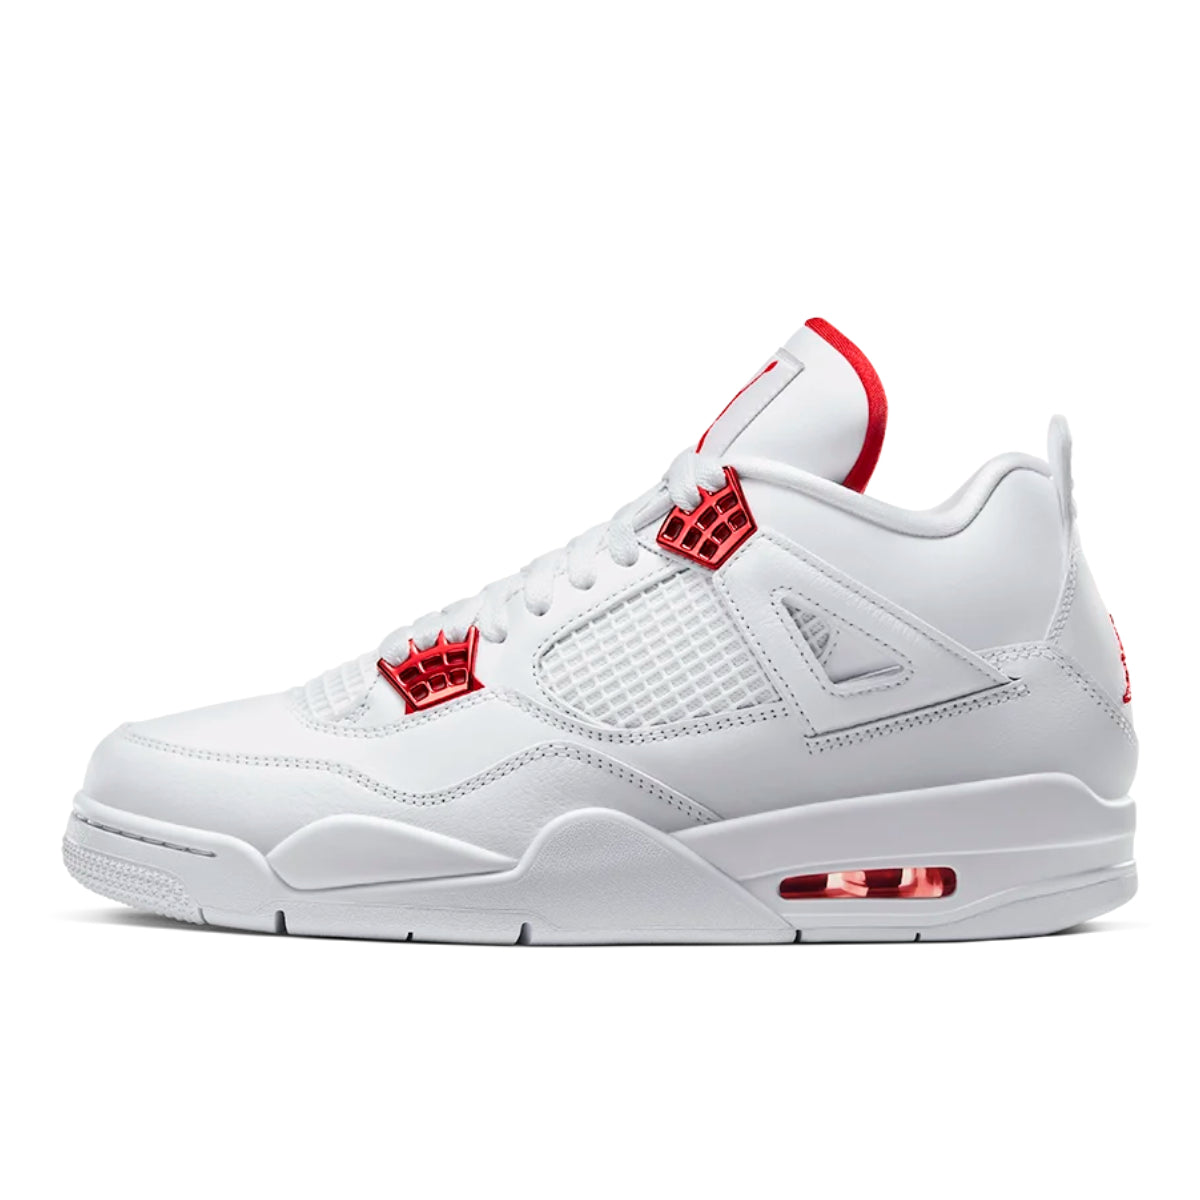 Revitalizing the iconic Air Jordan 4 silhouette, this remastered retro edition features a sleek all-white design now available at The Shoe Store.